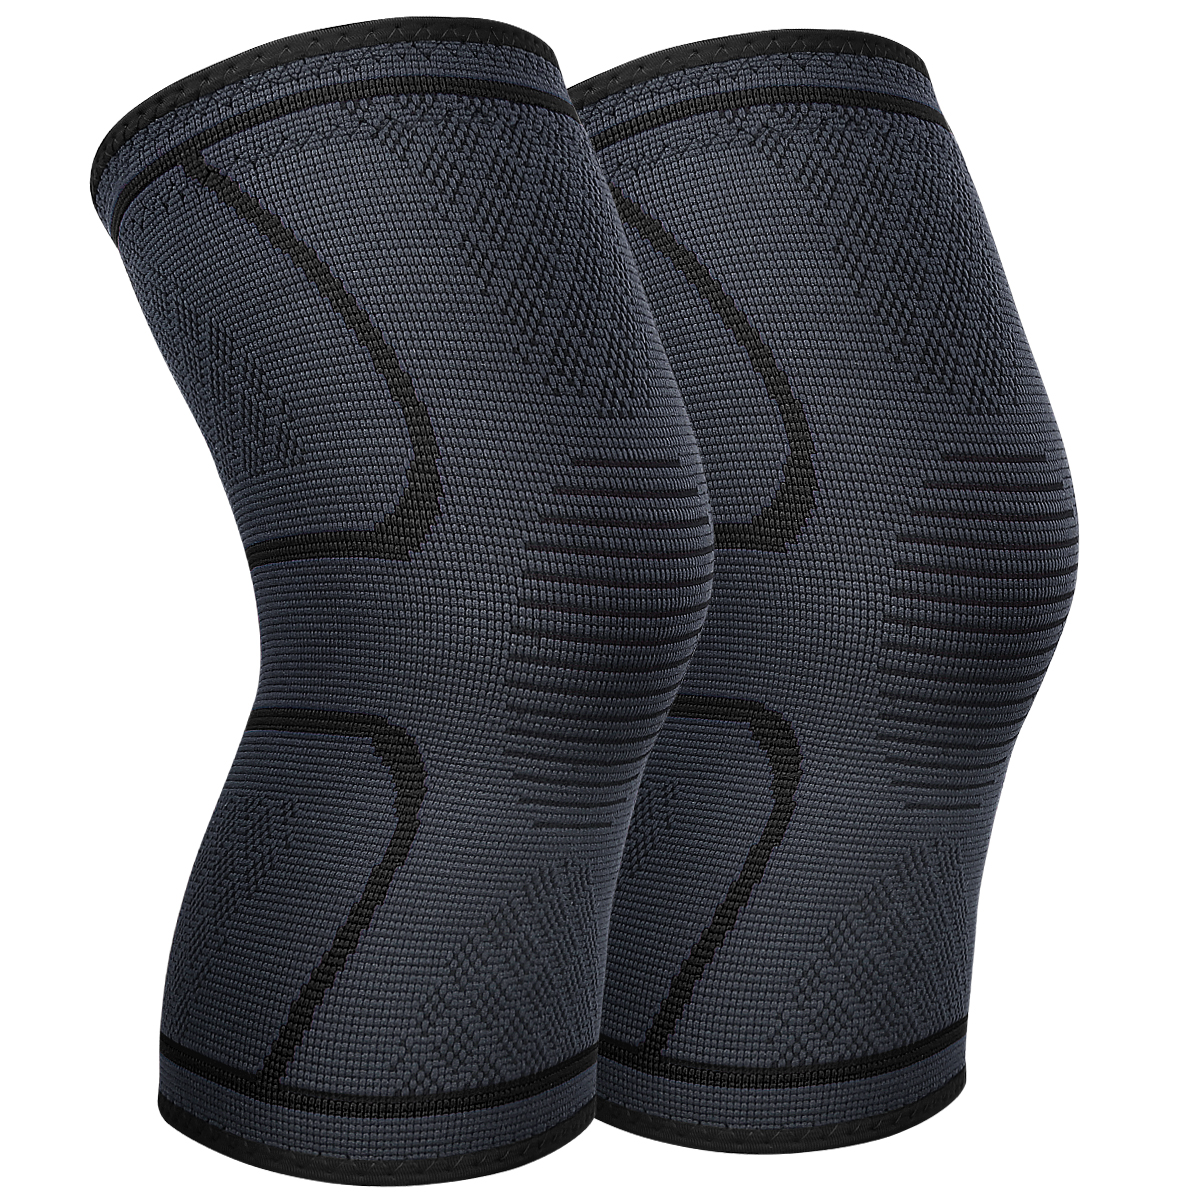 Knee Brace Support Pair for Men Women, AVIDDA Compression Knee Sleeve for Joint Pain Relief, Arthritis, Meniscus Tear, Injury Recovery, Running, Squats, Weight Lifting, Football Gray L